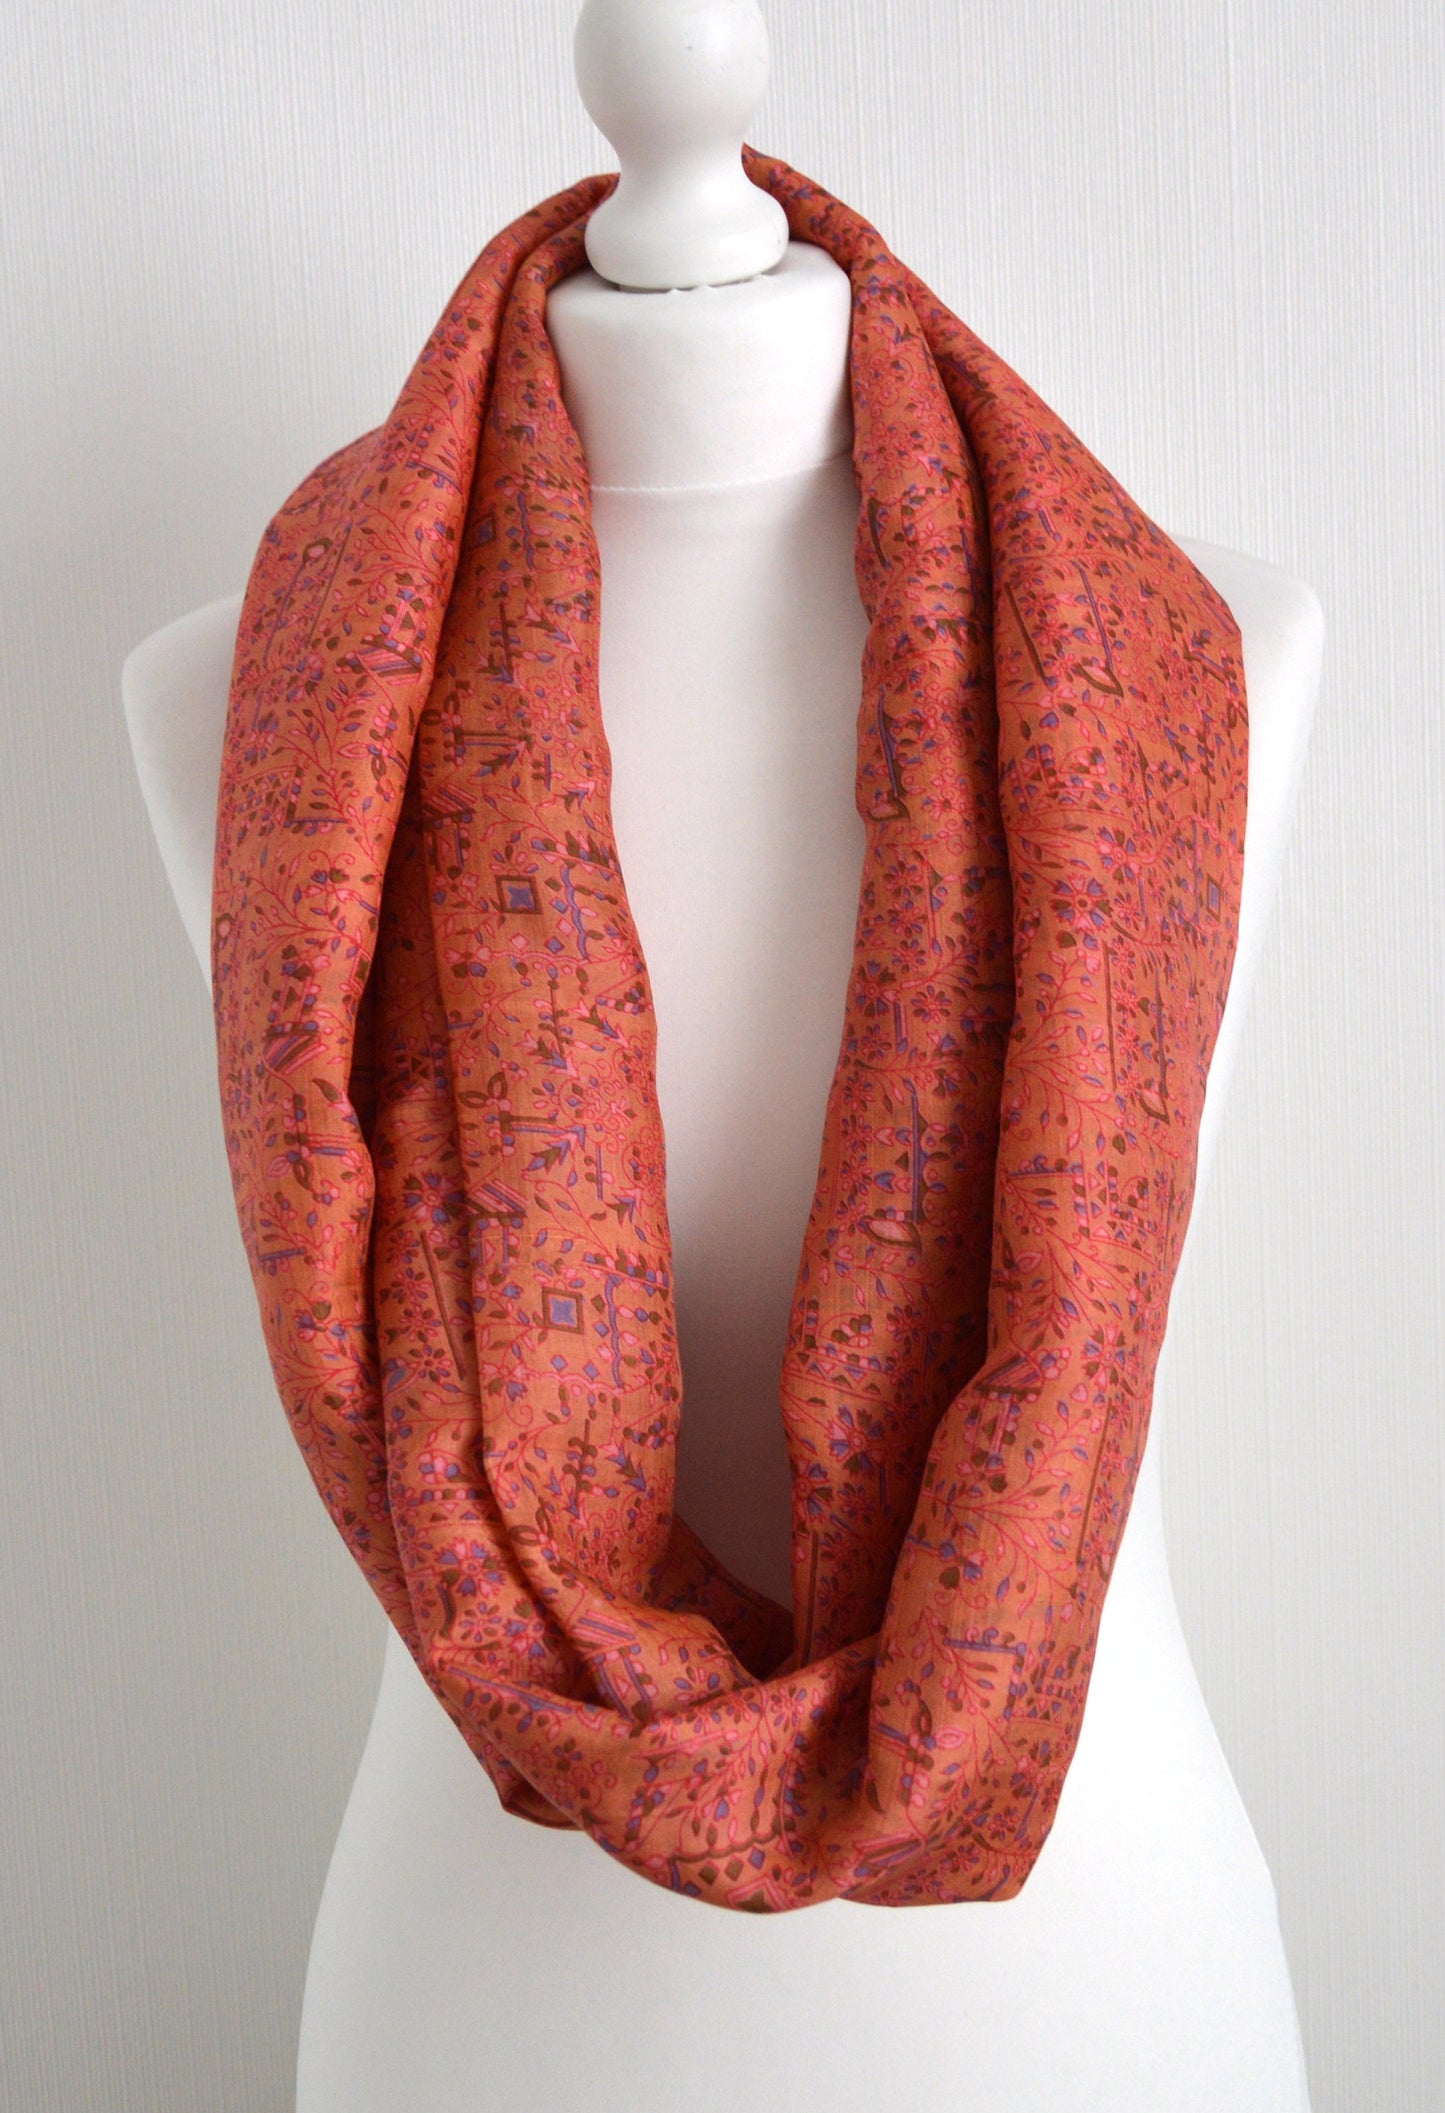 Peach Floral Sari Silk Scarf - Bohemian  Womens Scarf - Eco Friendly Upcycled Mothers Day Gift For Her Mum Sister Aunt